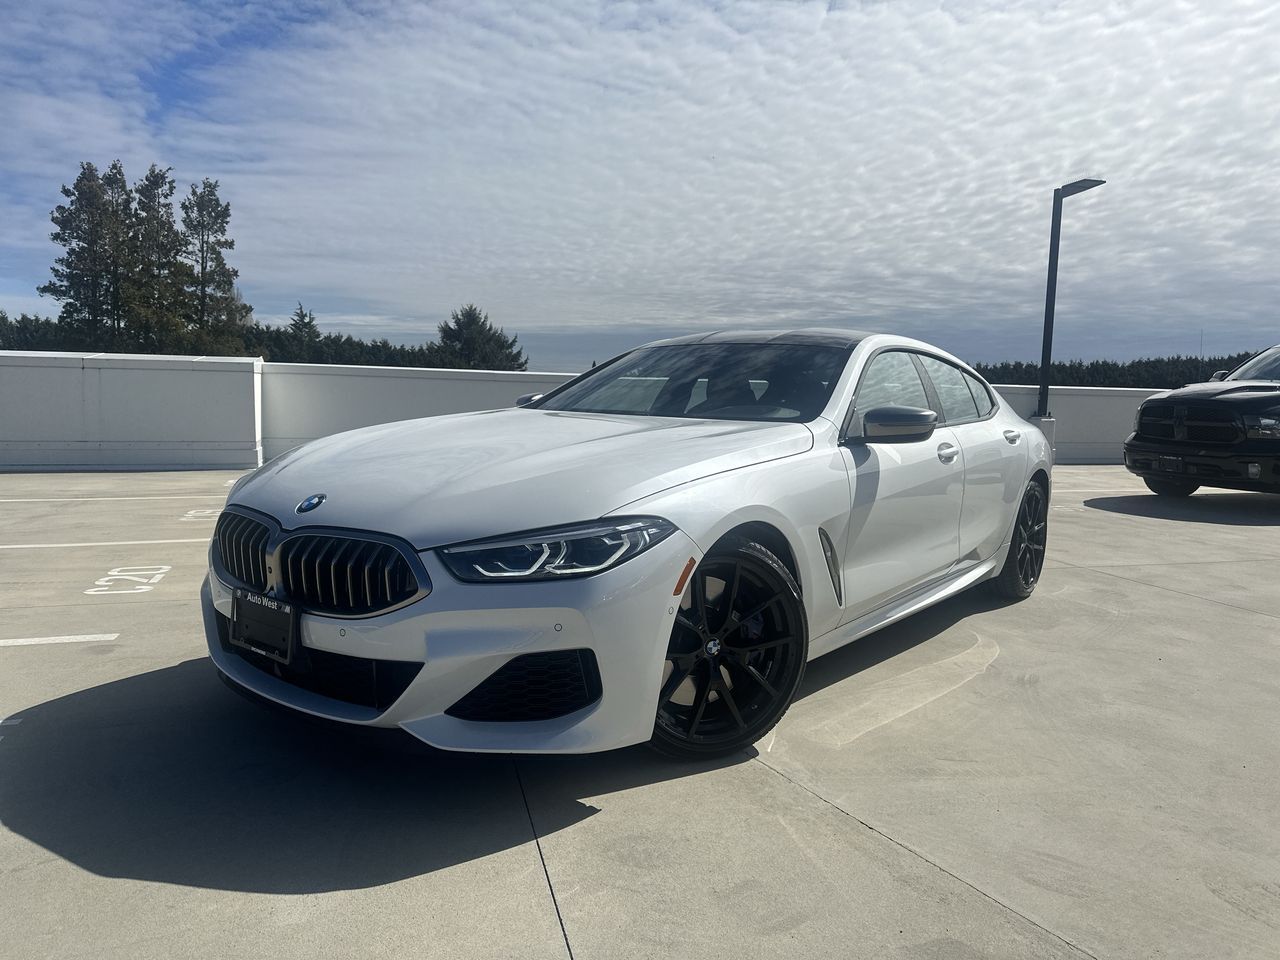 2020 BMW 8 Series M850i xDrive GC | LowKM | Carbon roof and trim